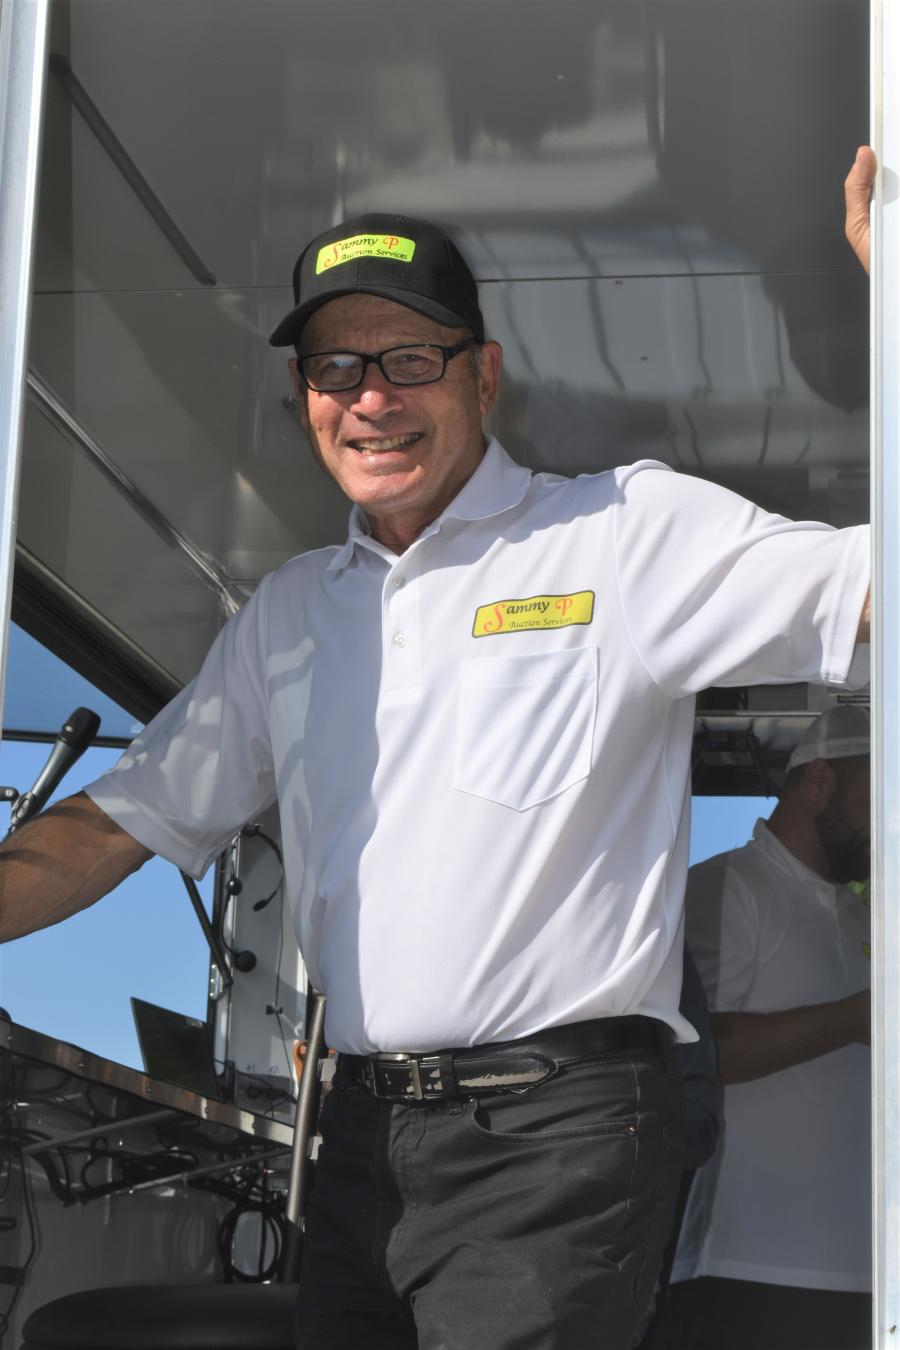 Sammy Petrowsky returns to the auction industry with his own Sammy P Auction Services.
(CEG photo)